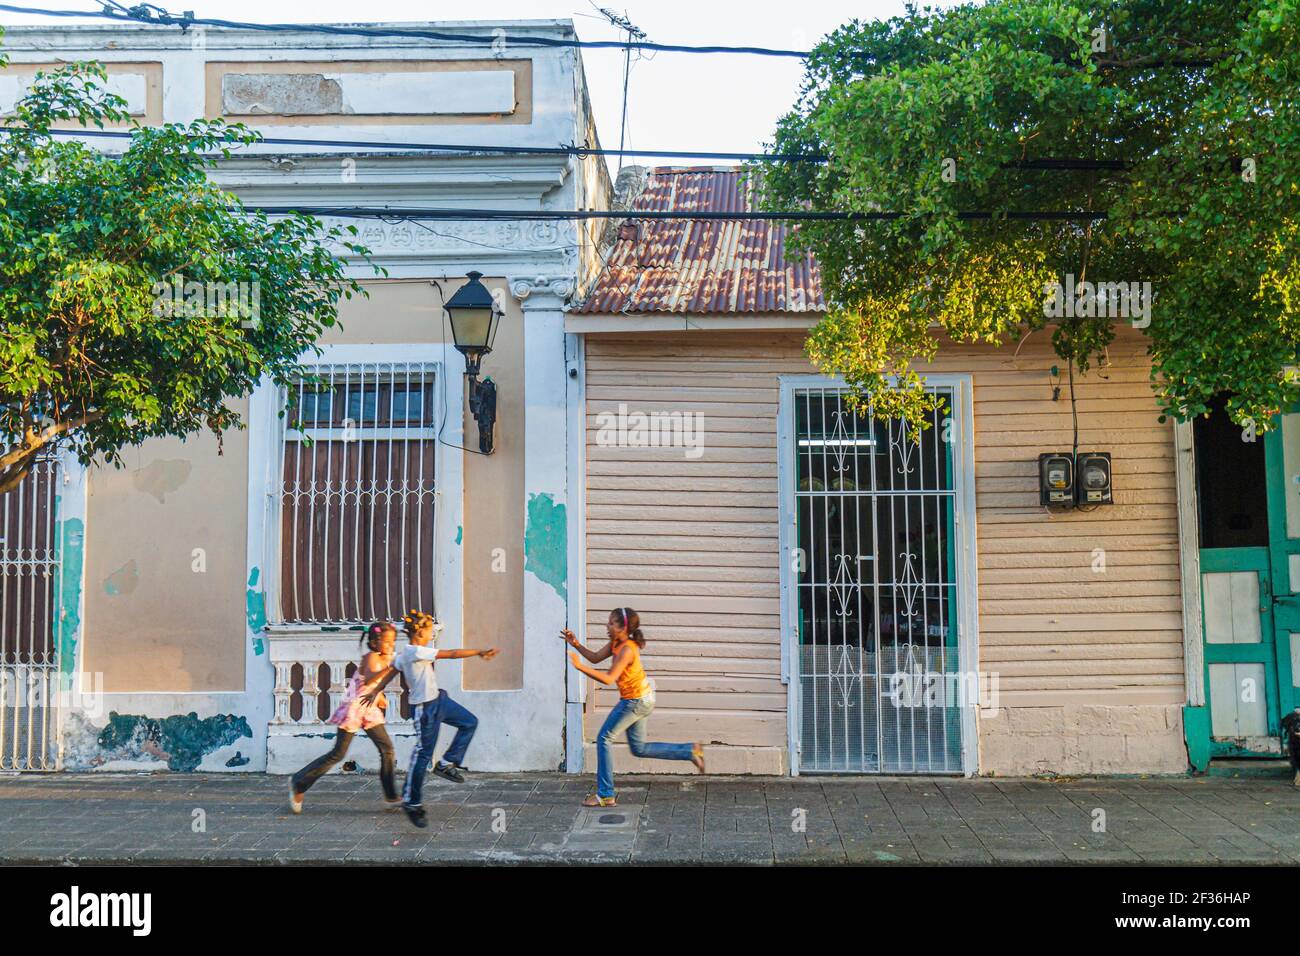 Santo Domingo Dominican Republic,Ciudad Colonia Zona Colonial,Calle Portes residential street neighborhood house home,Hispanic girls playing youngster Stock Photo